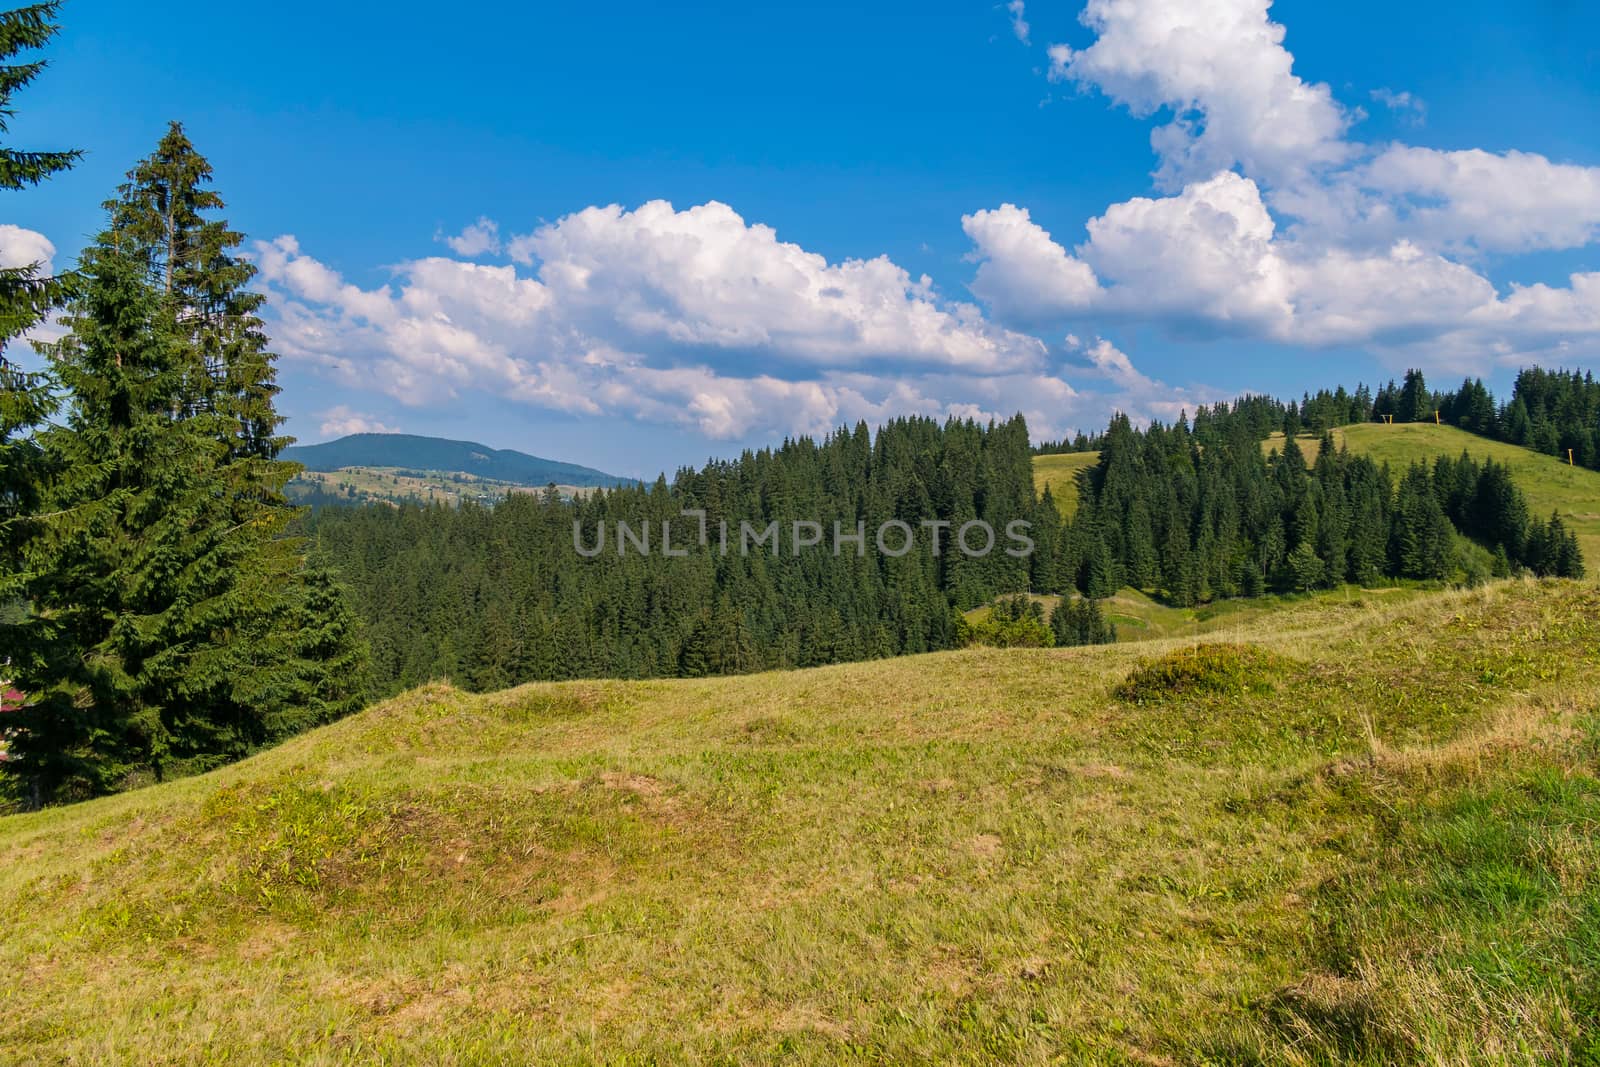 White dense clouds against the blue sky lie on the green mountain slopes with a dense forest growing on them.